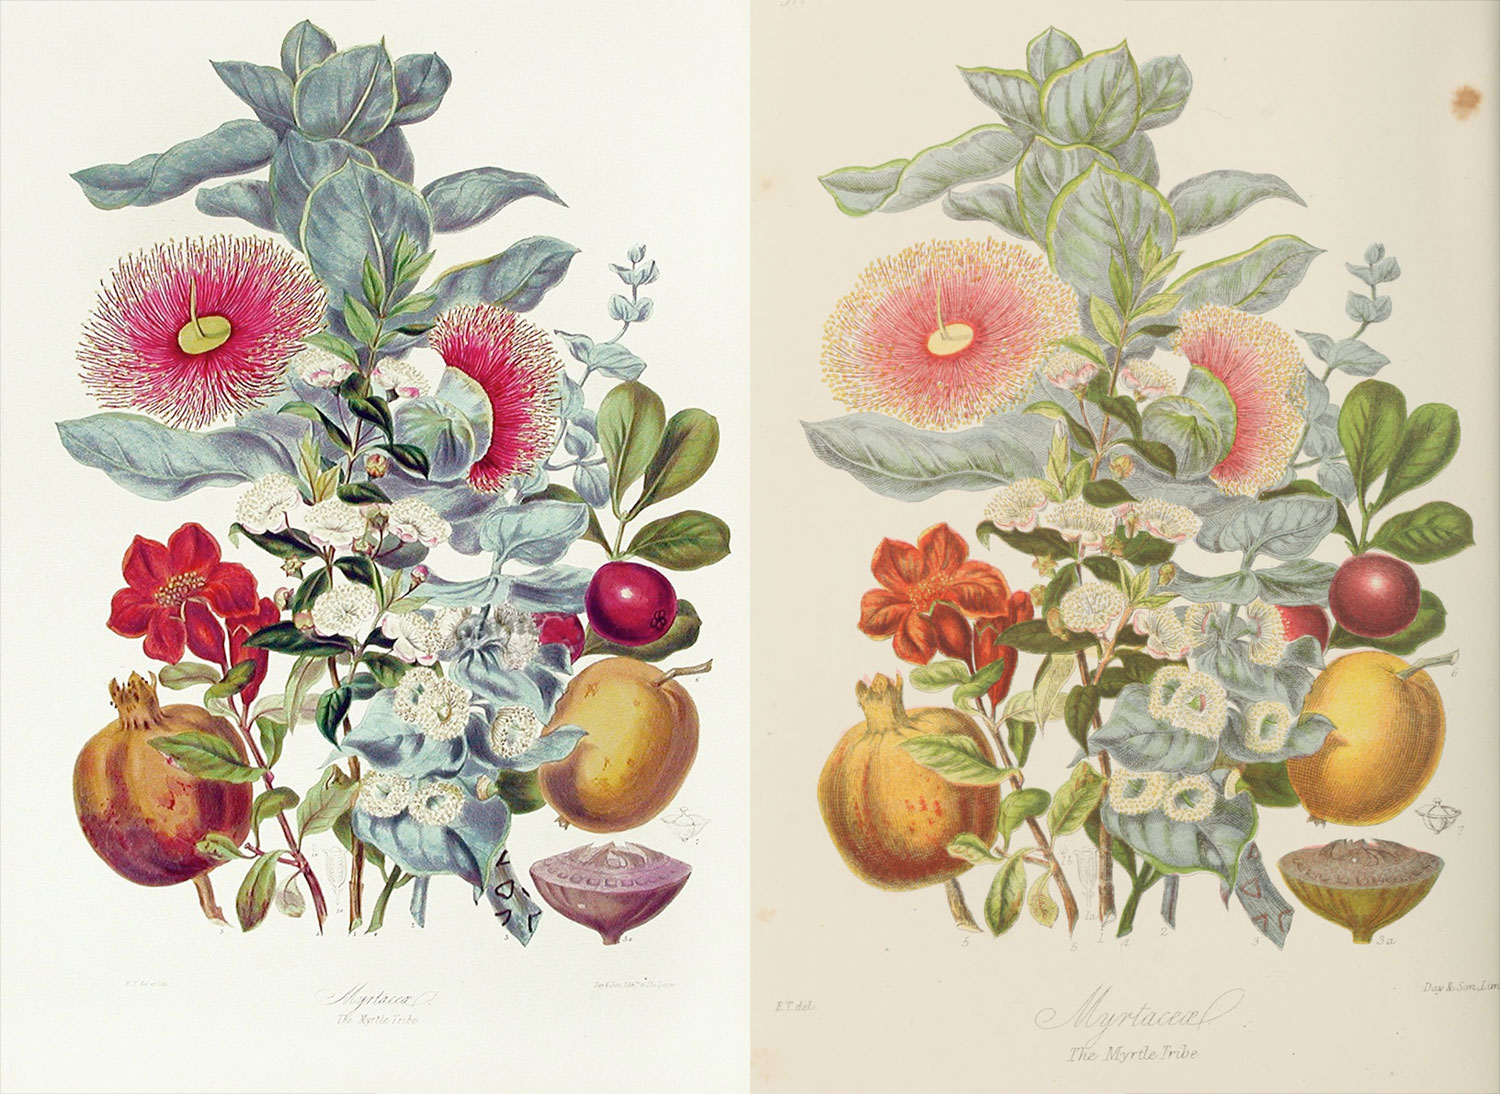 Side-by-side comparison of the original lithograph (left) and reproduction (right) of the myrtle tribe